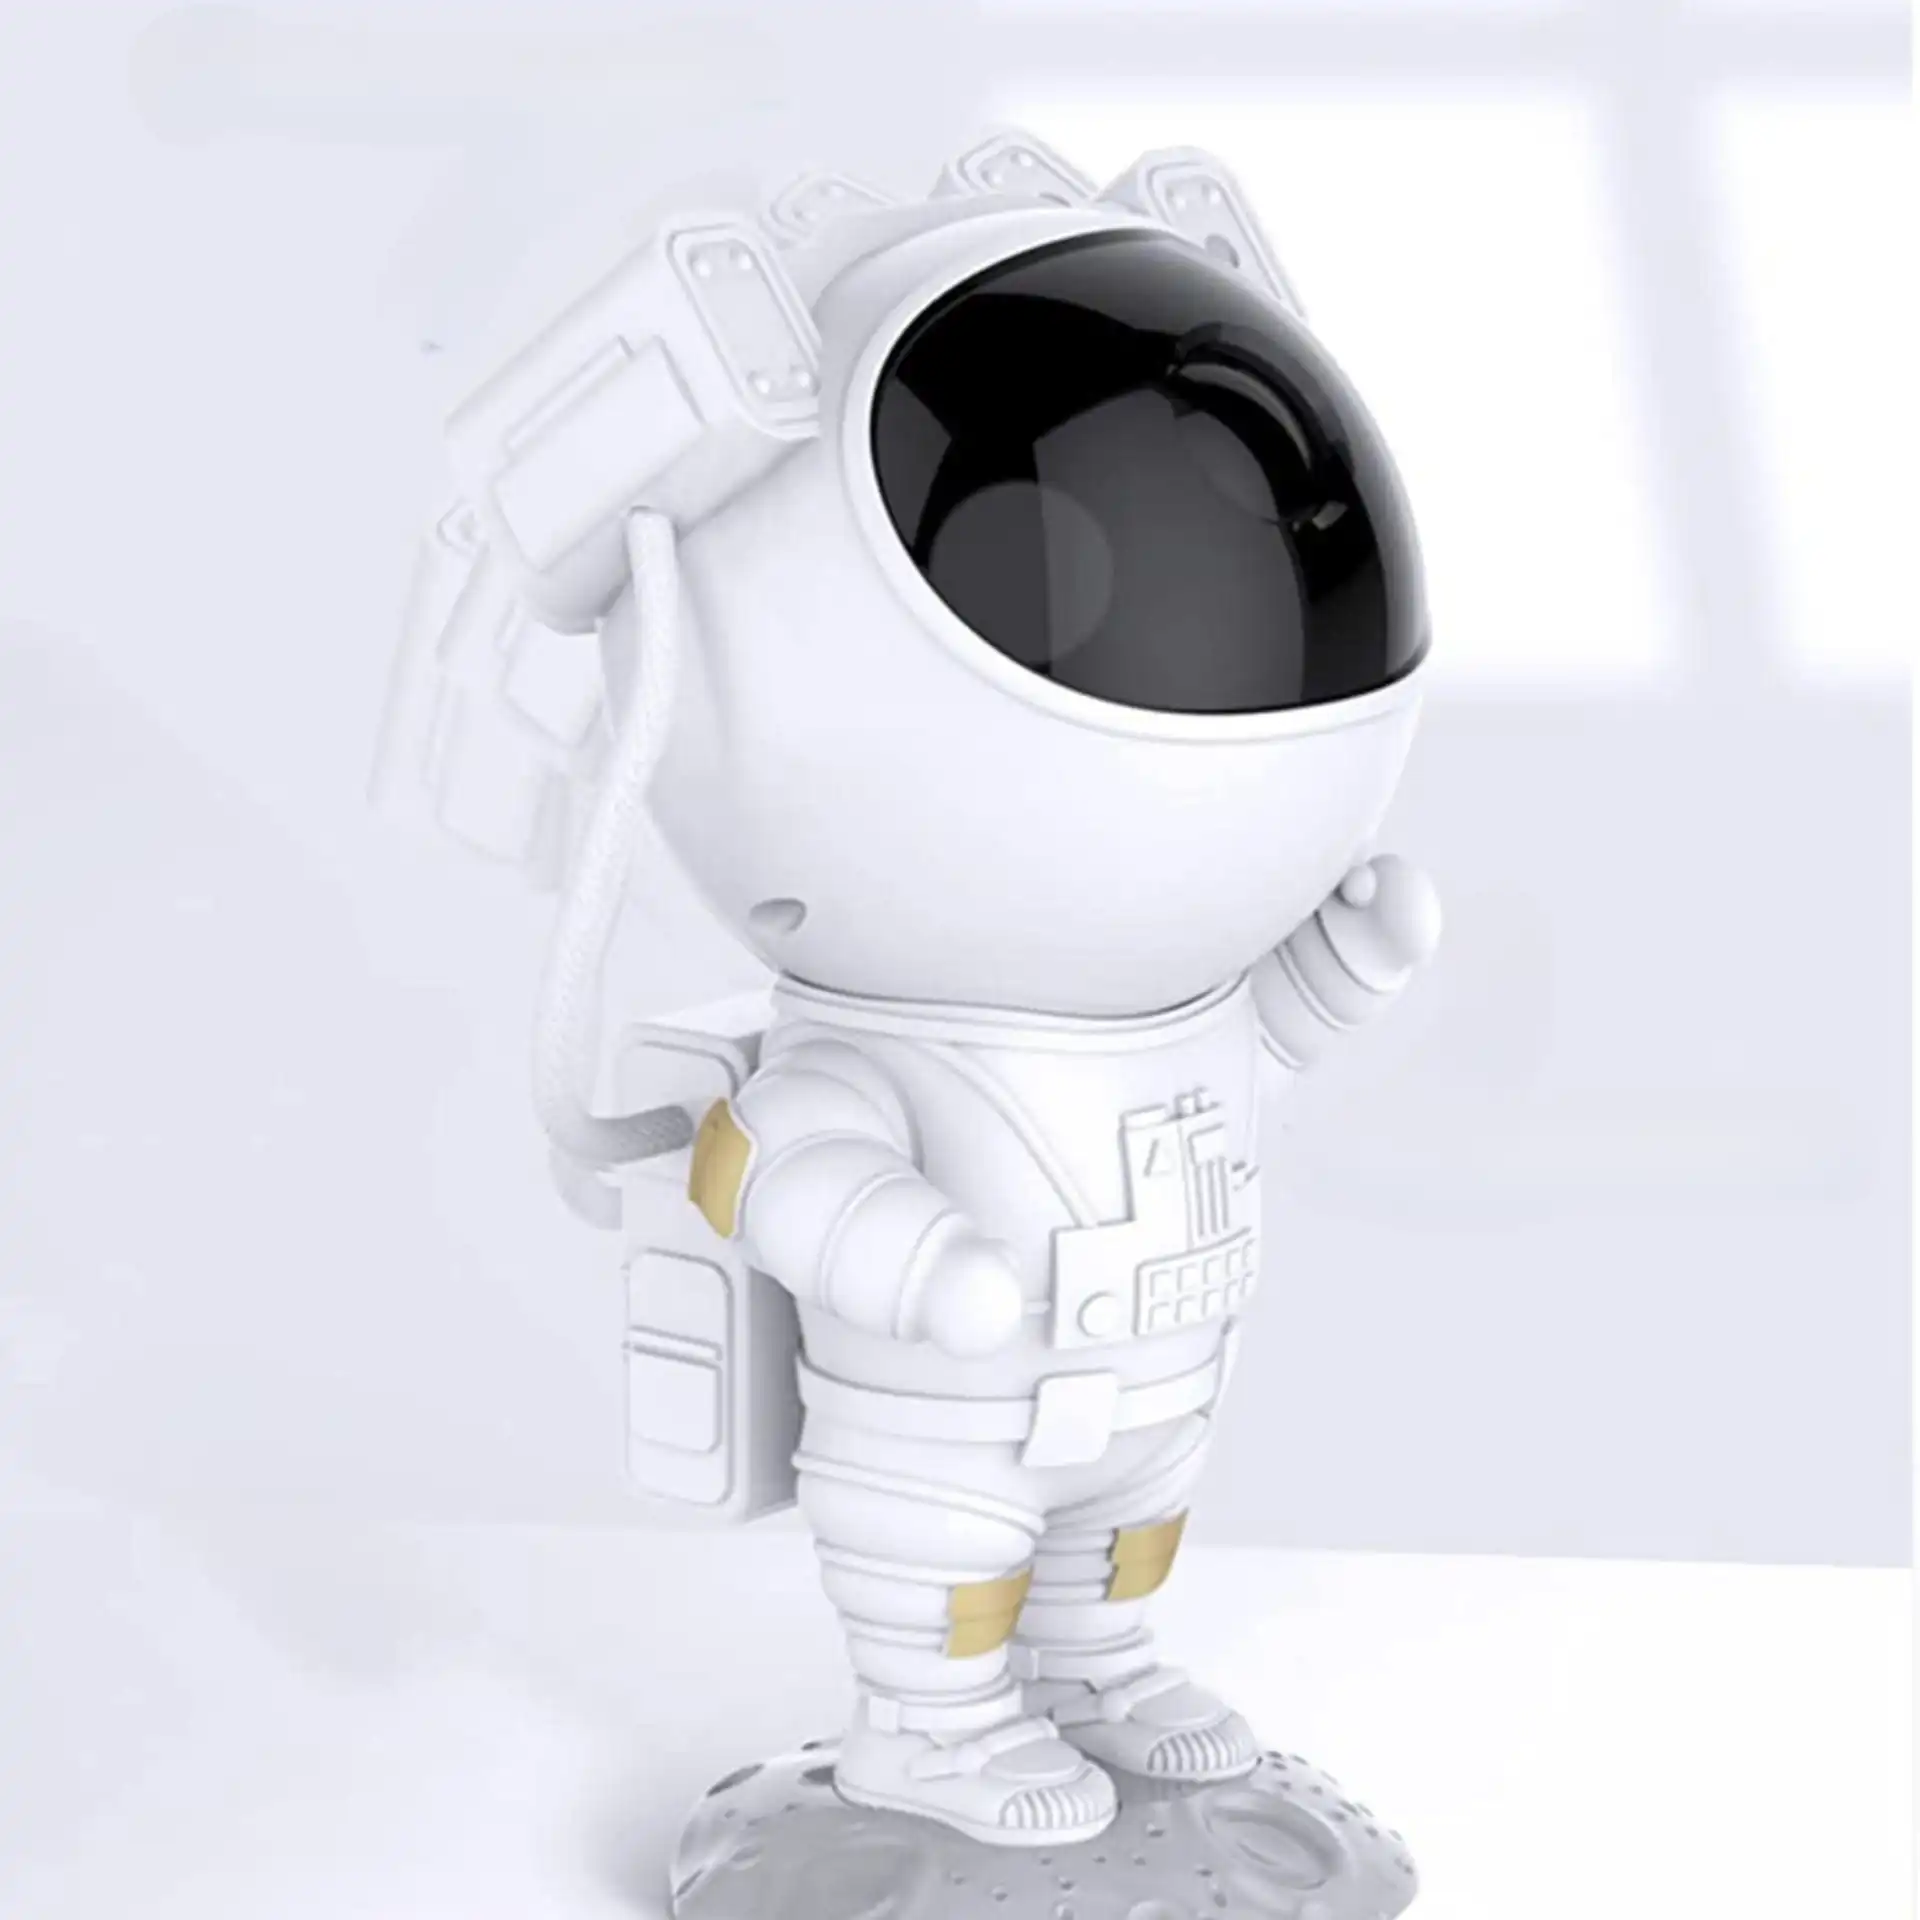 Glowly Astronaut LED Galaxy Projector for Ultimate Starry Night Light Experience